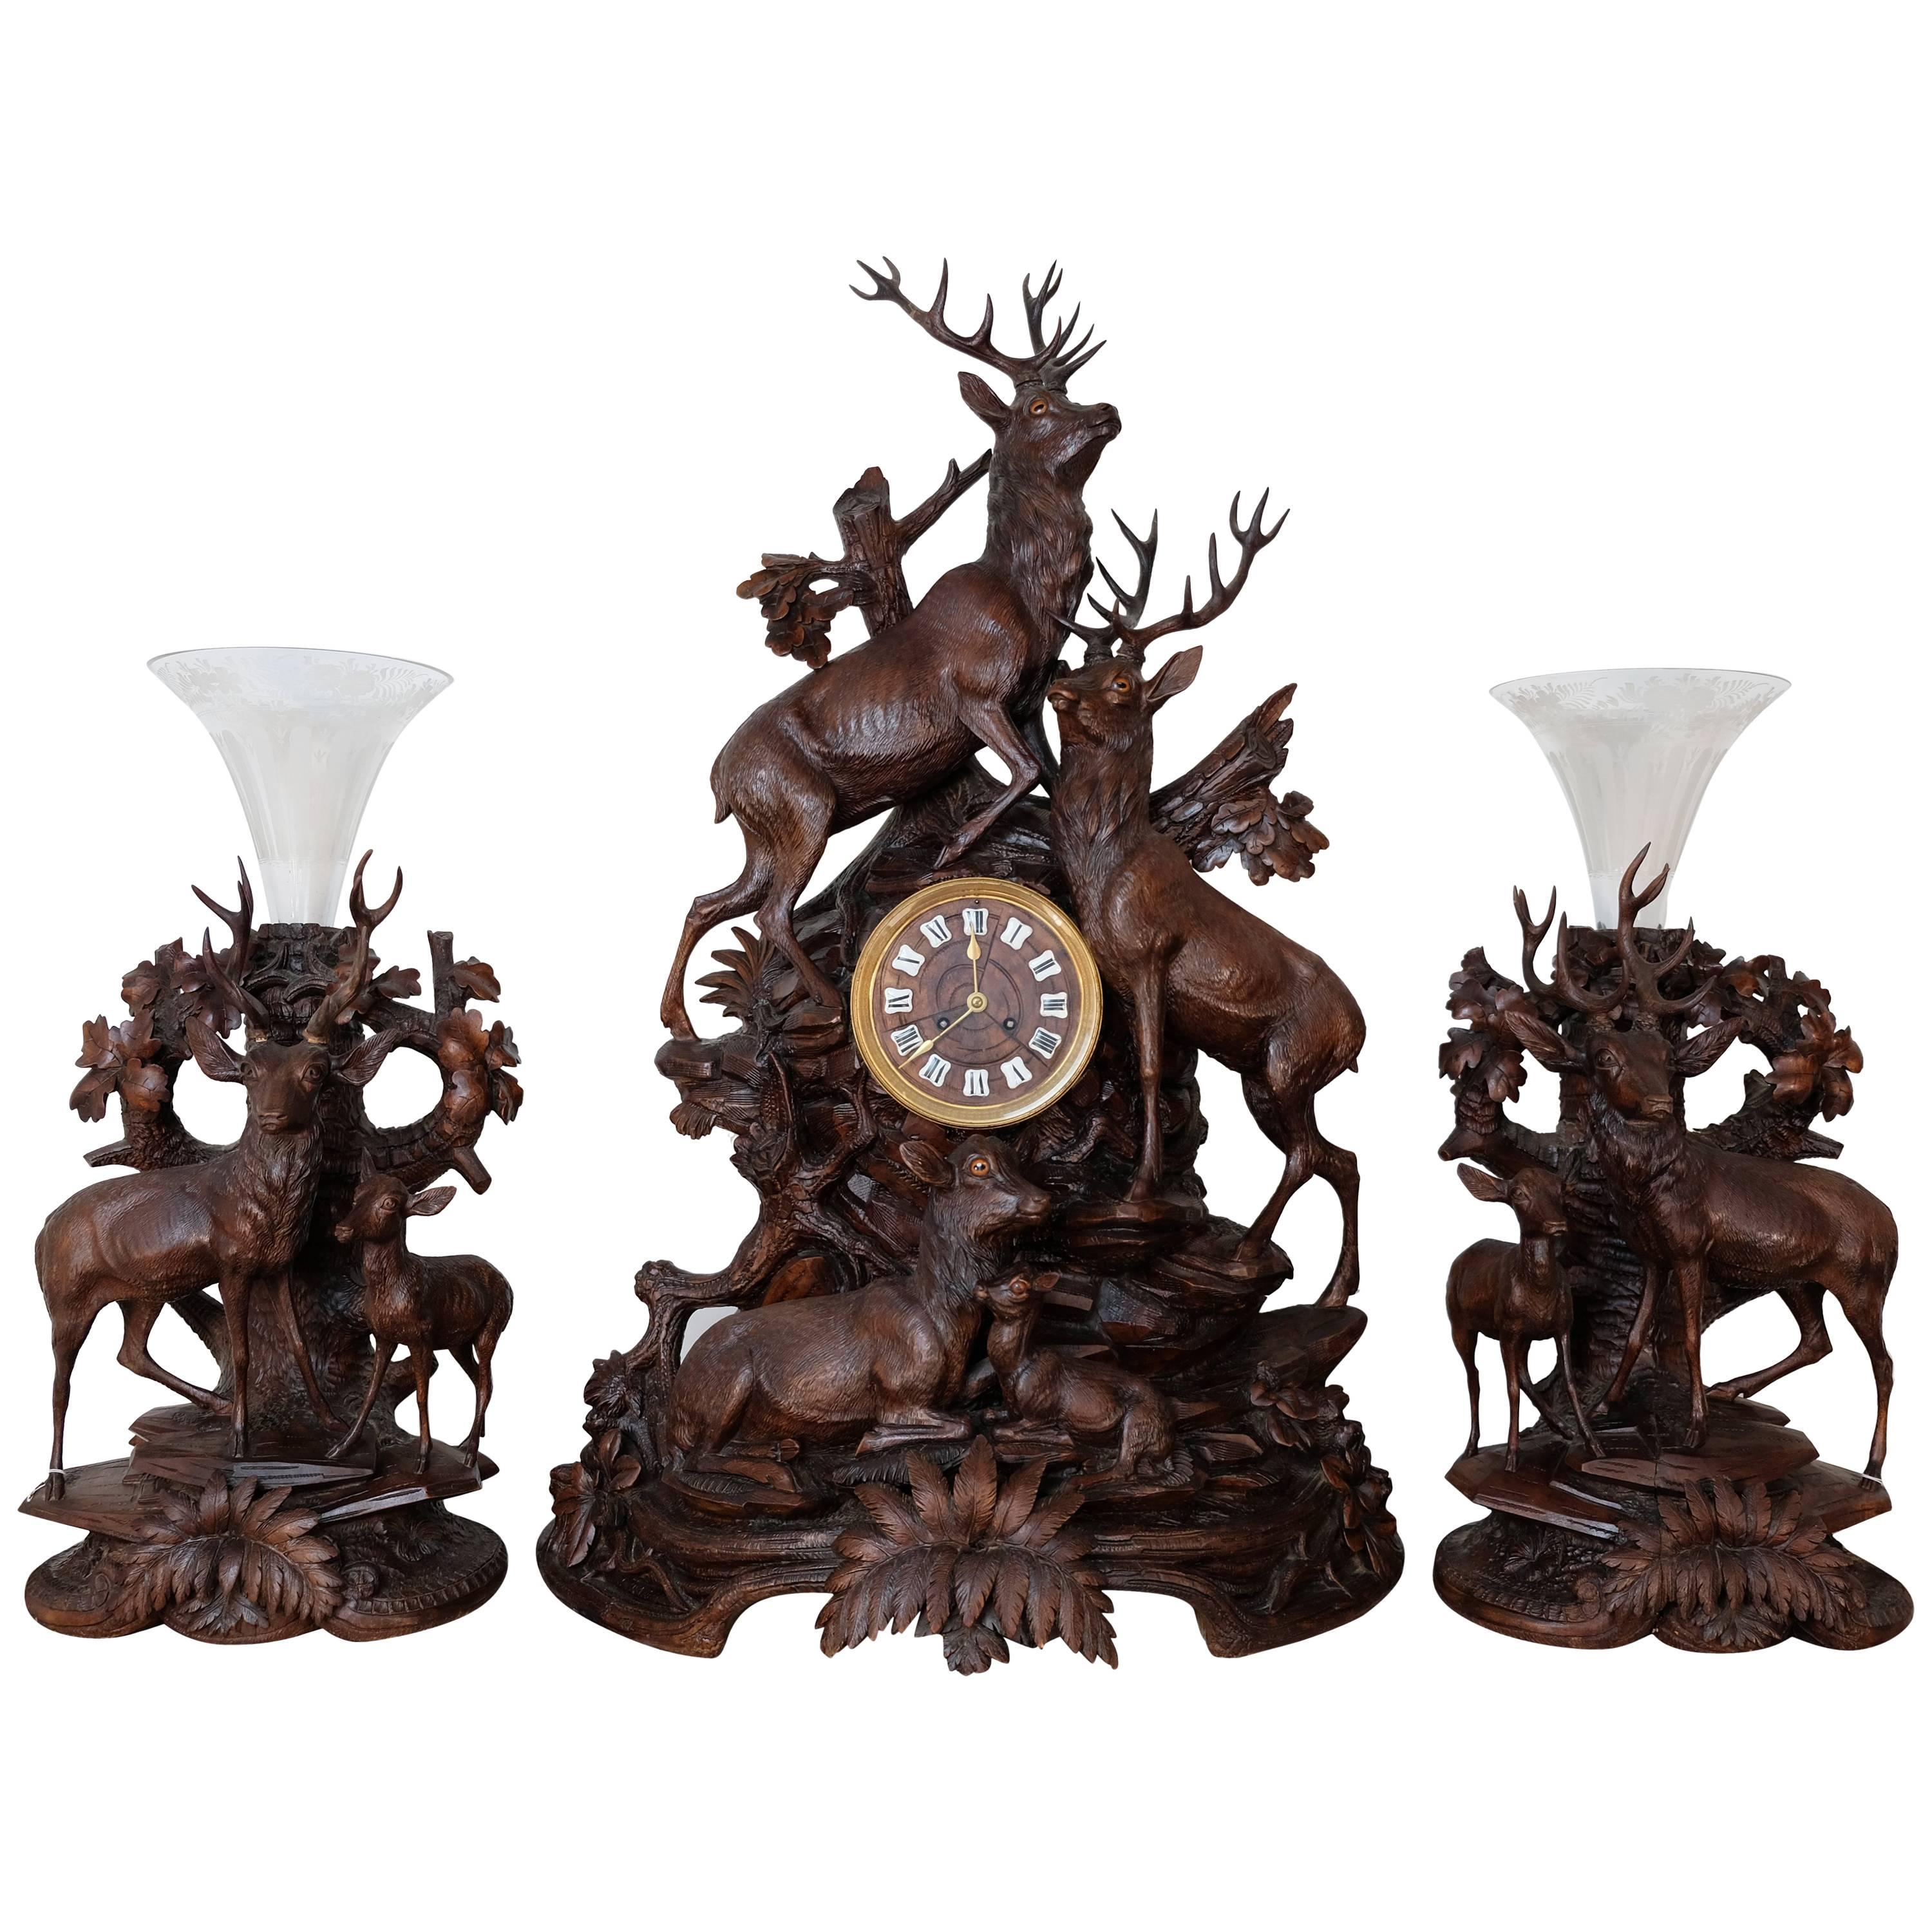 Three-Piece Large Black Forest Stag Clock